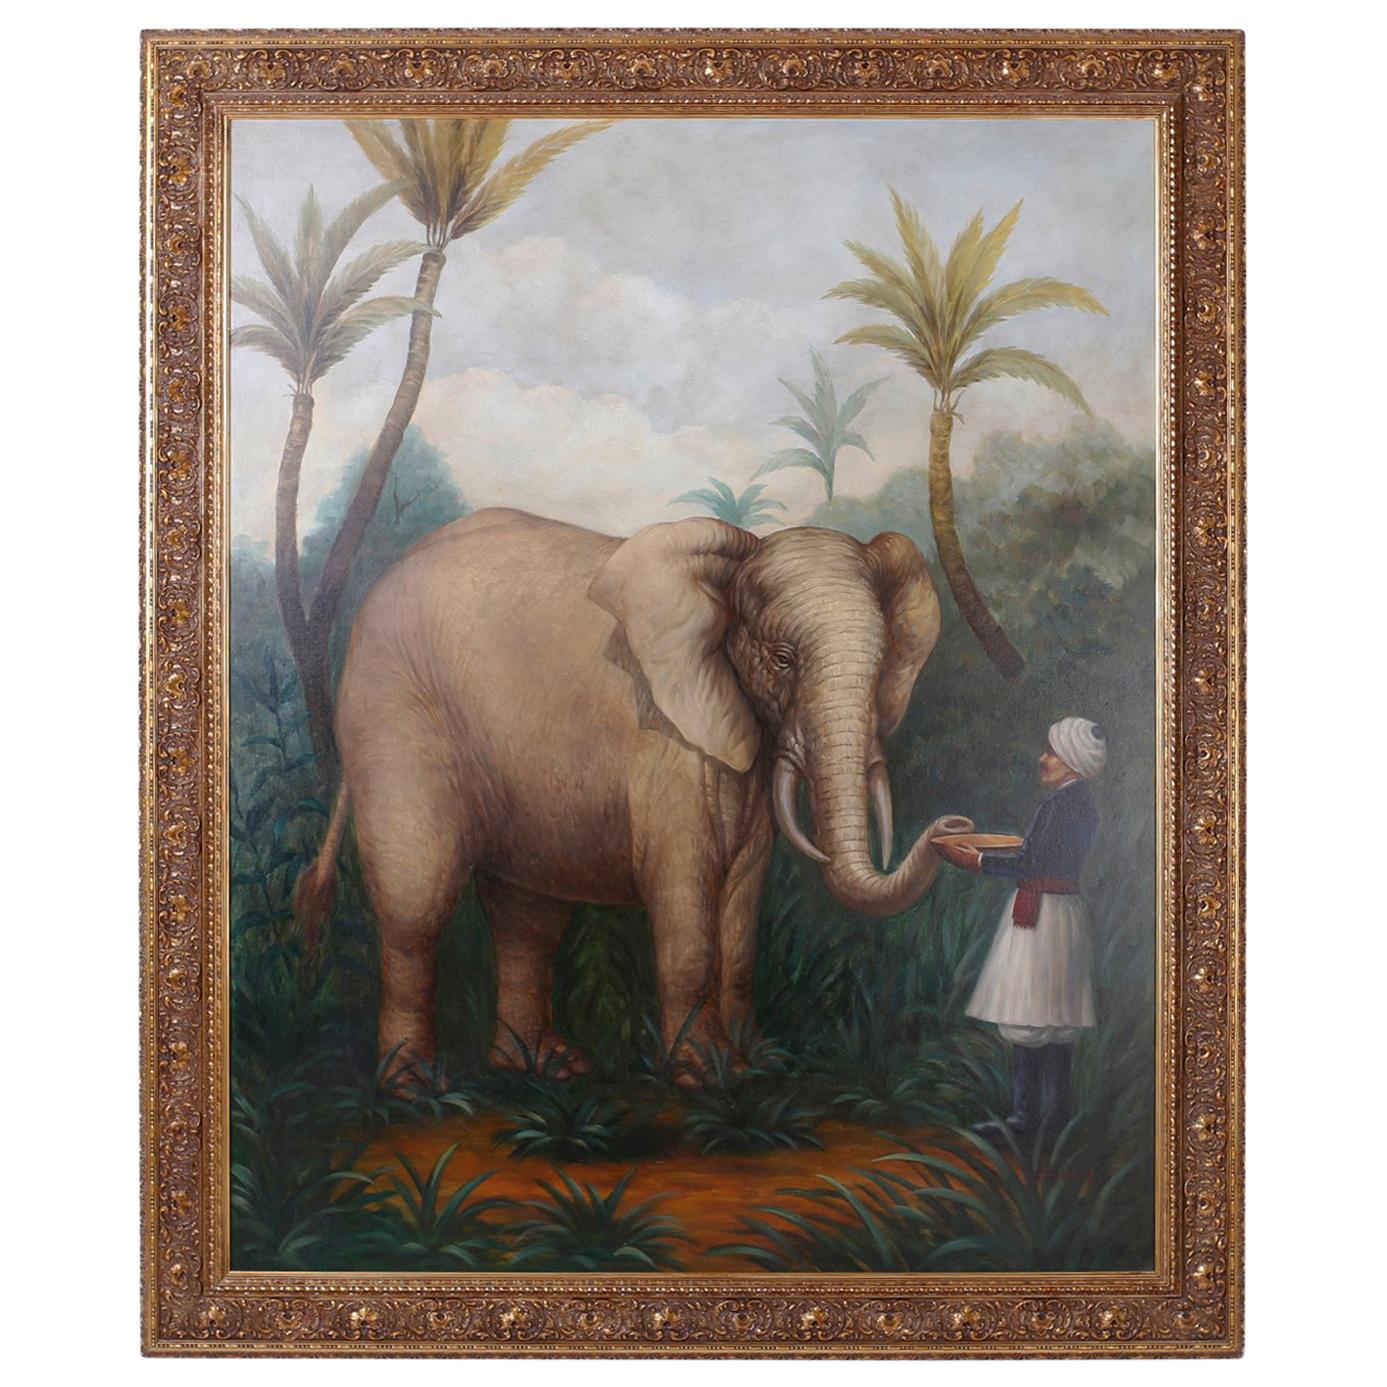 Large Oil Painting on Canvas of an Elephant and a Man